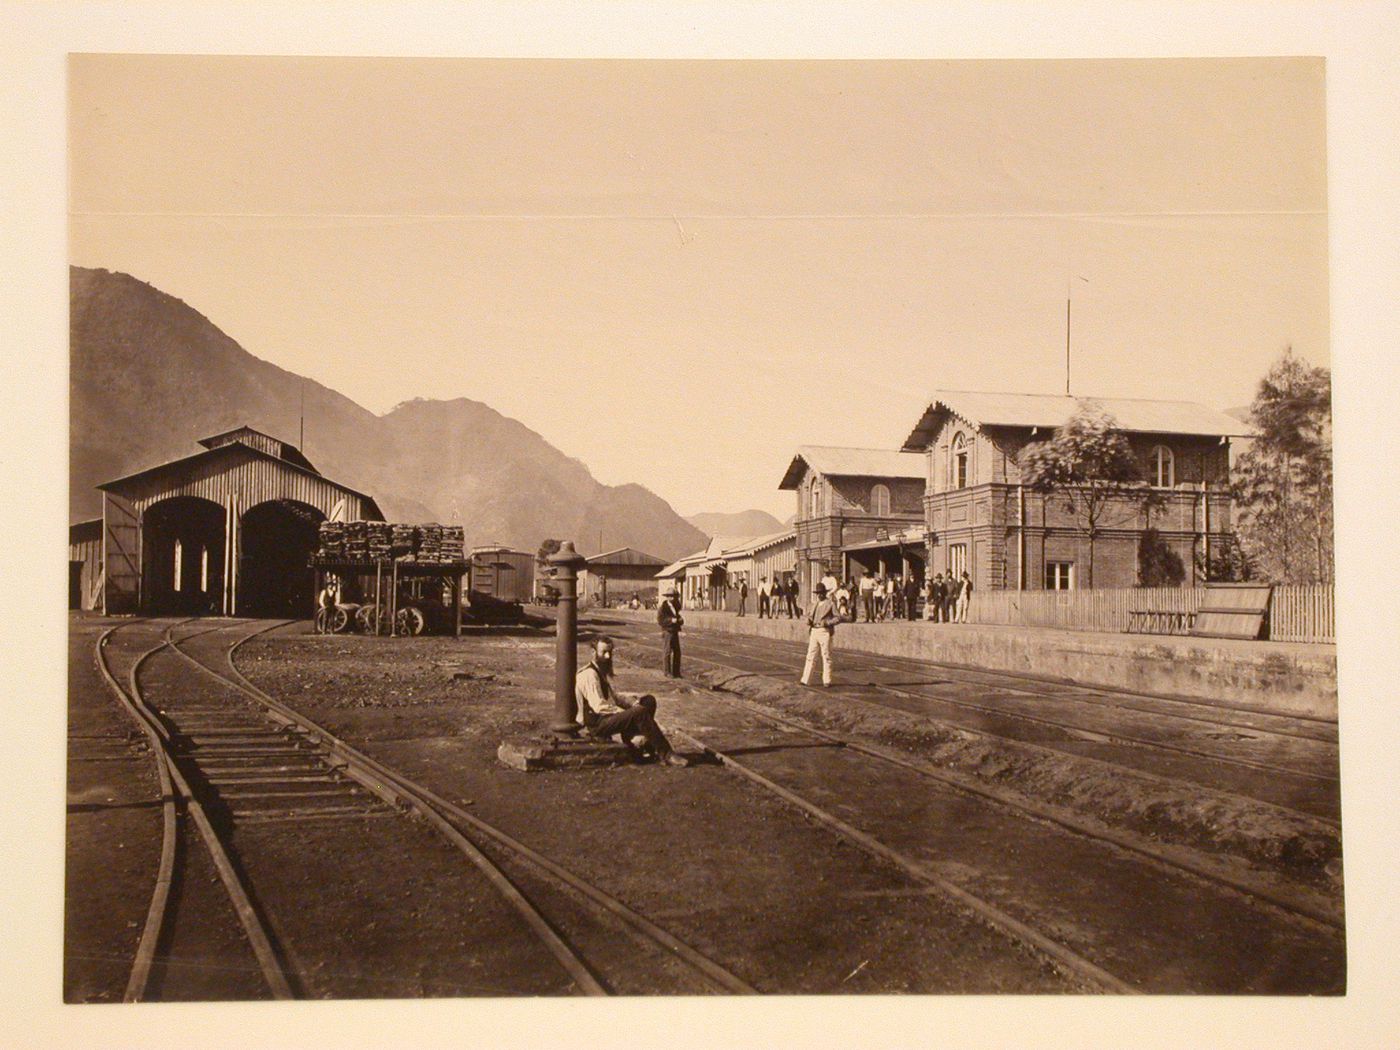 View of the Orizaba railway station showing men standing on the platform with a train shed on the left and mountains in the background, Mexico